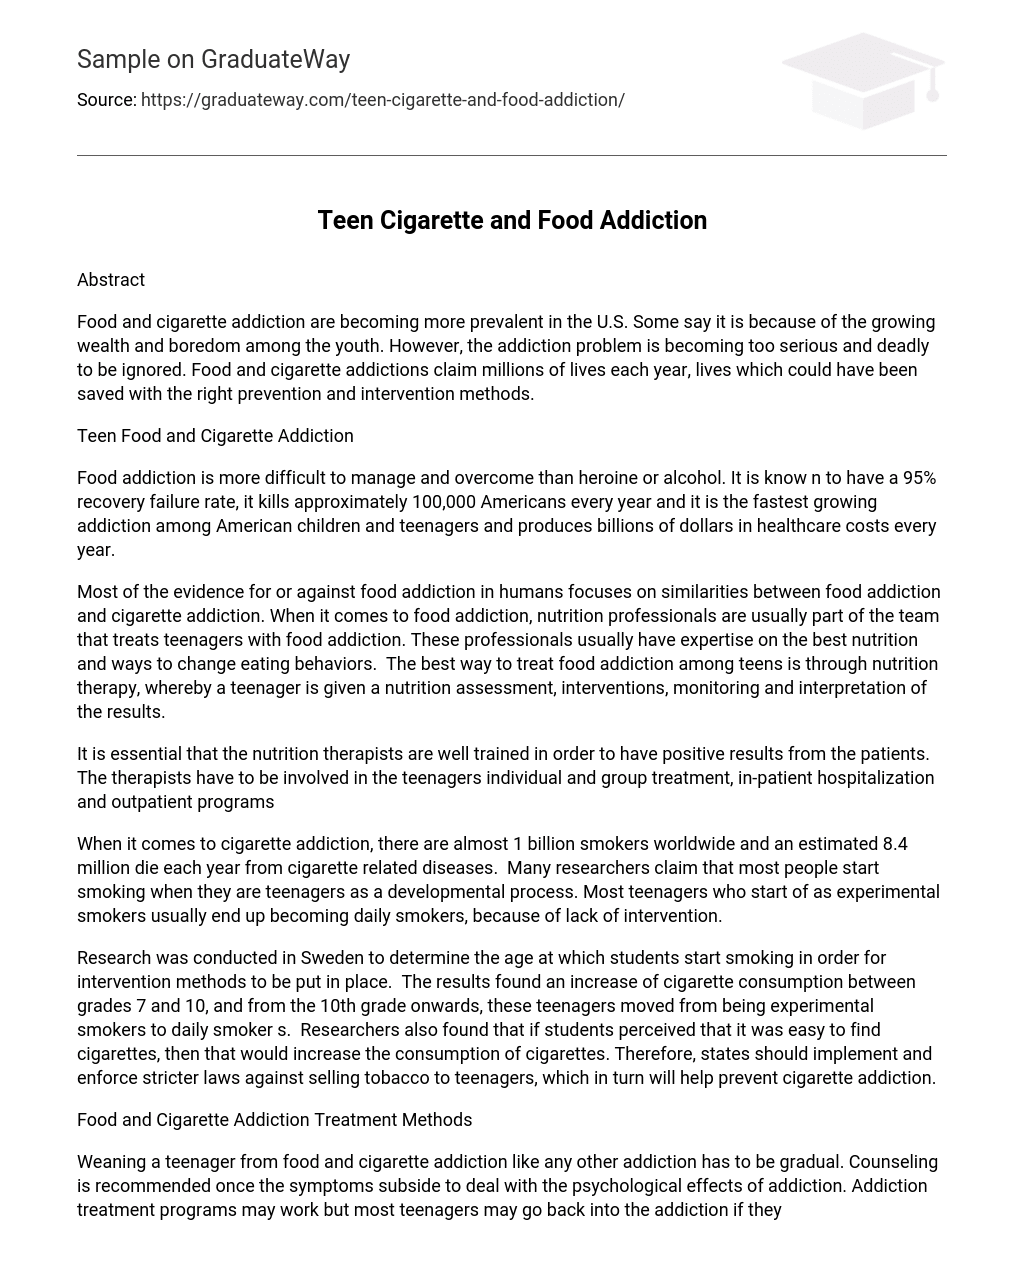 Teen Cigarette and Food Addiction